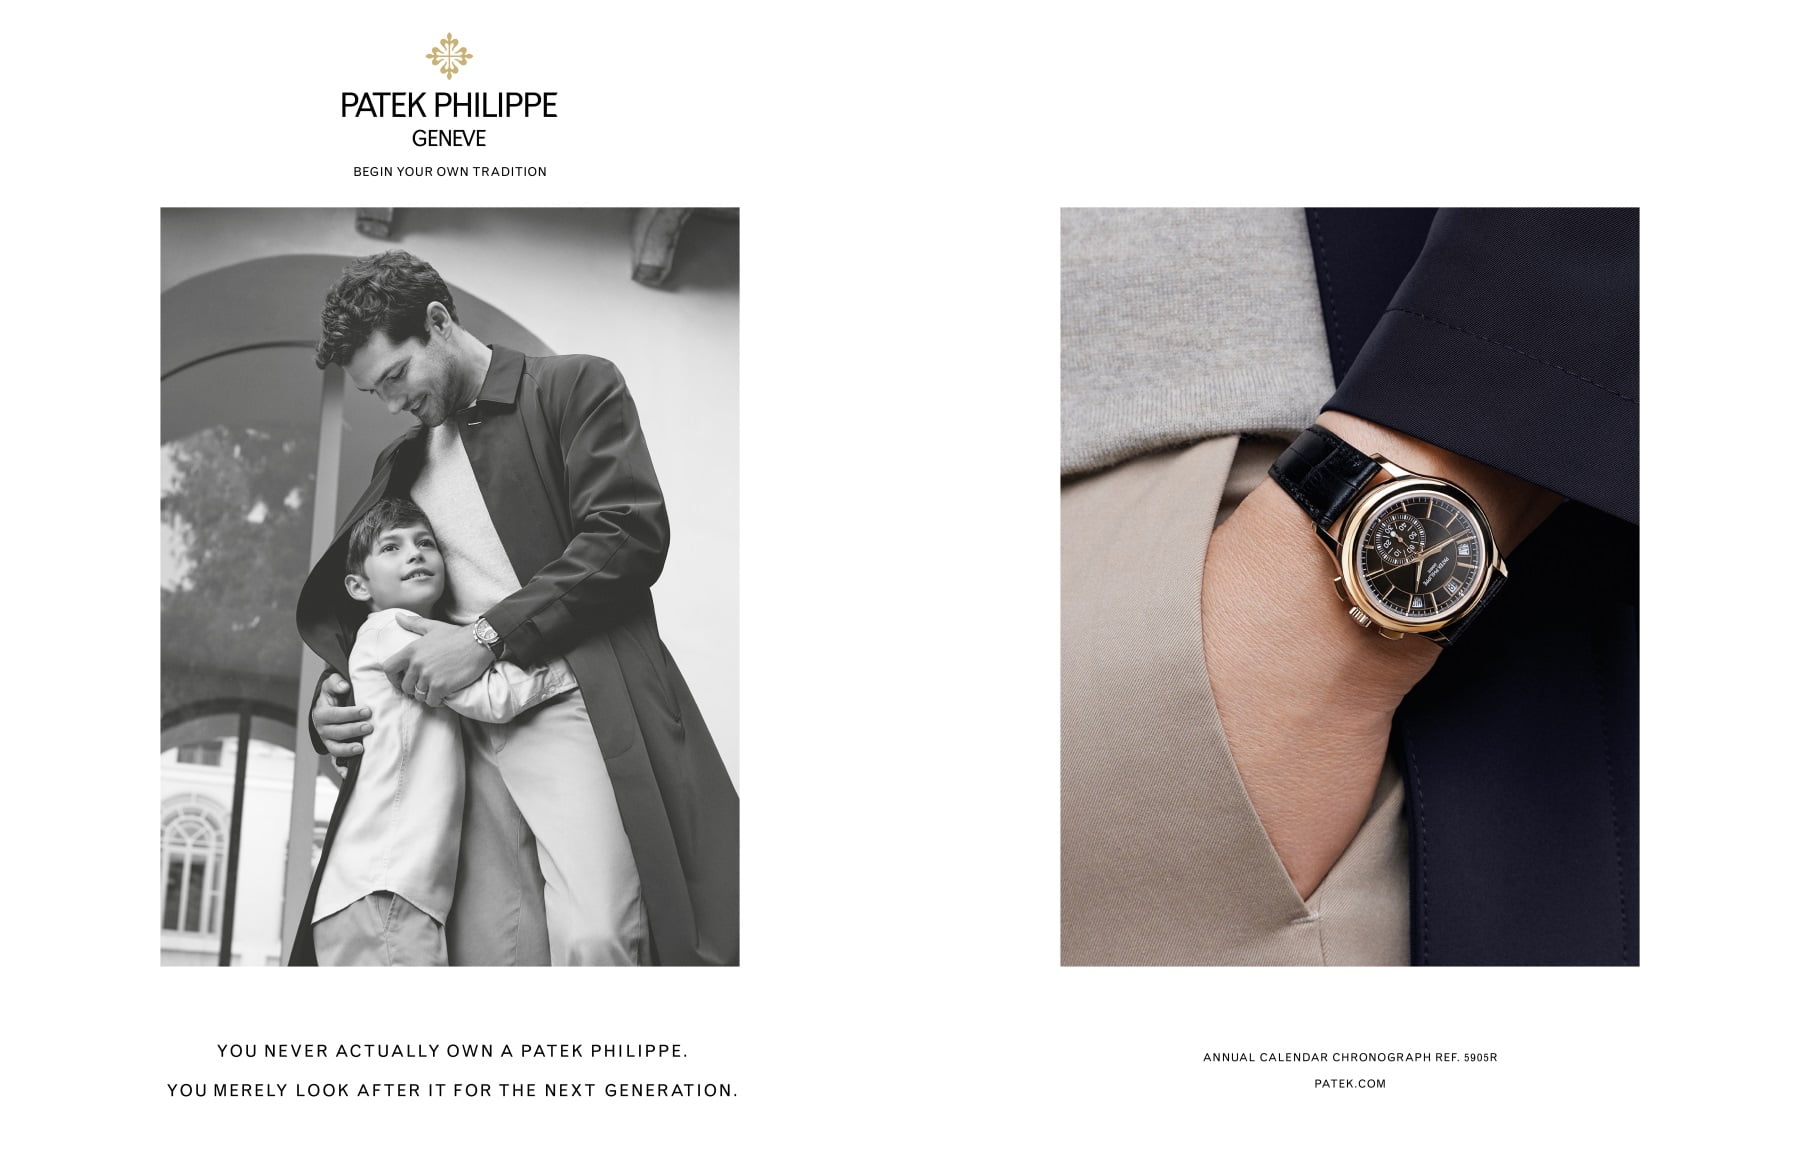 Patek Philippe with a very classy Father's Day marketing campaign 